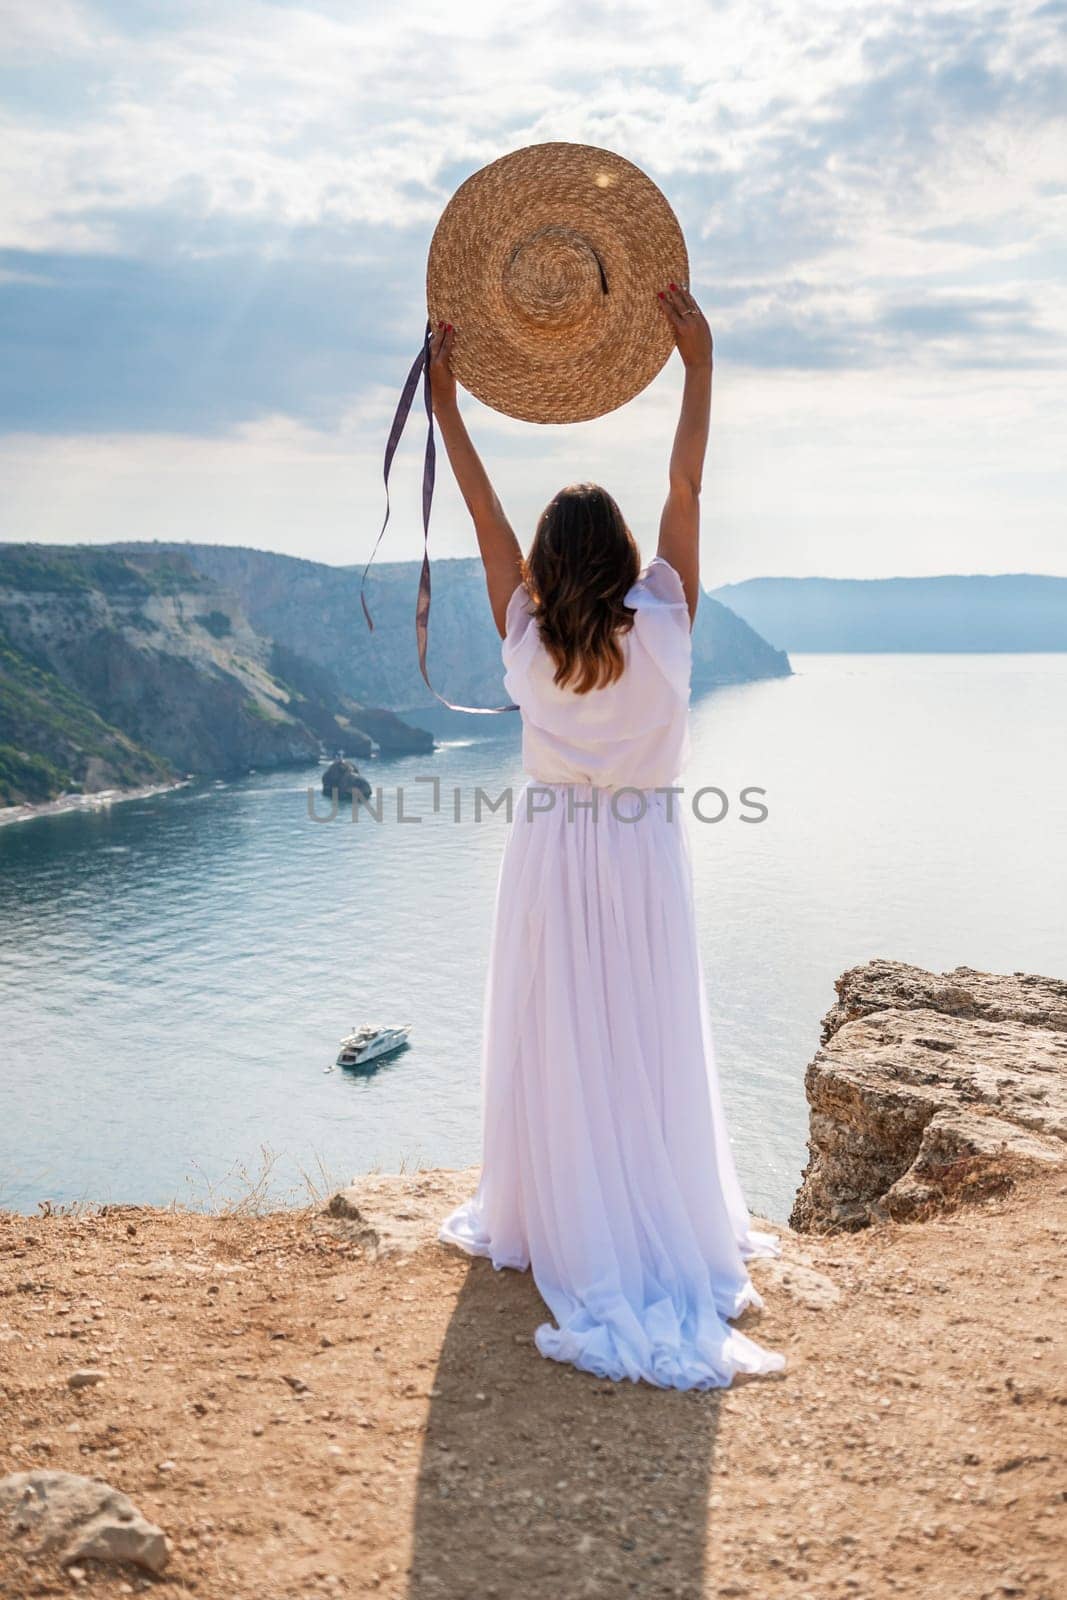 woman white dress stands on a rocky cliff overlooking the ocean. She is wearing a straw hat and she is enjoying the view